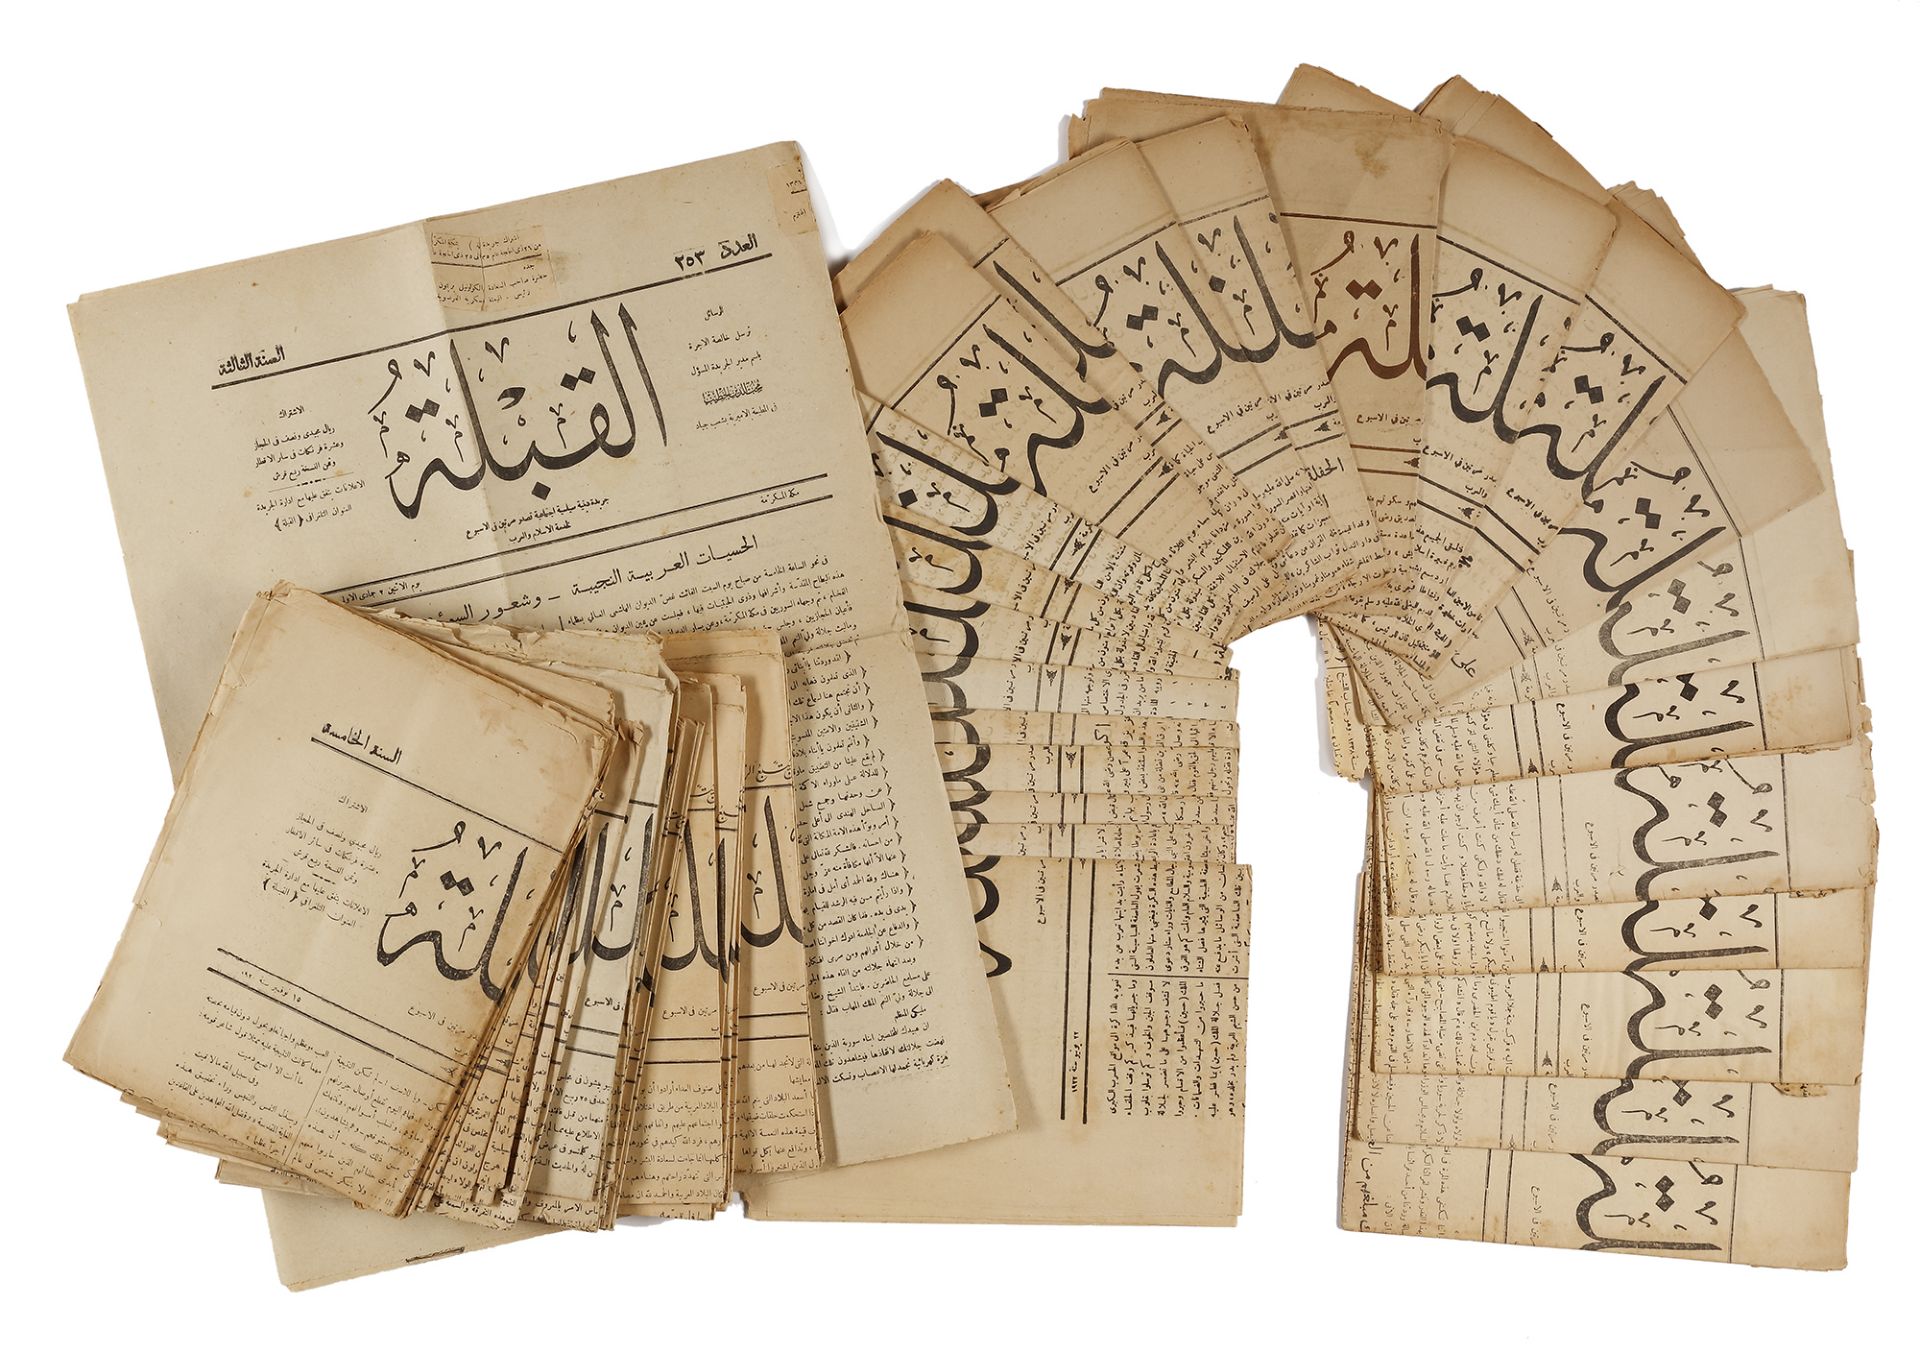 A SELECTION OF THE FIRST ARAB NEWSPAPER ‘AL QIBLA’ PRINTED AND PUBLISHED IN MECCA (HIJAZ) BETWEEN 19